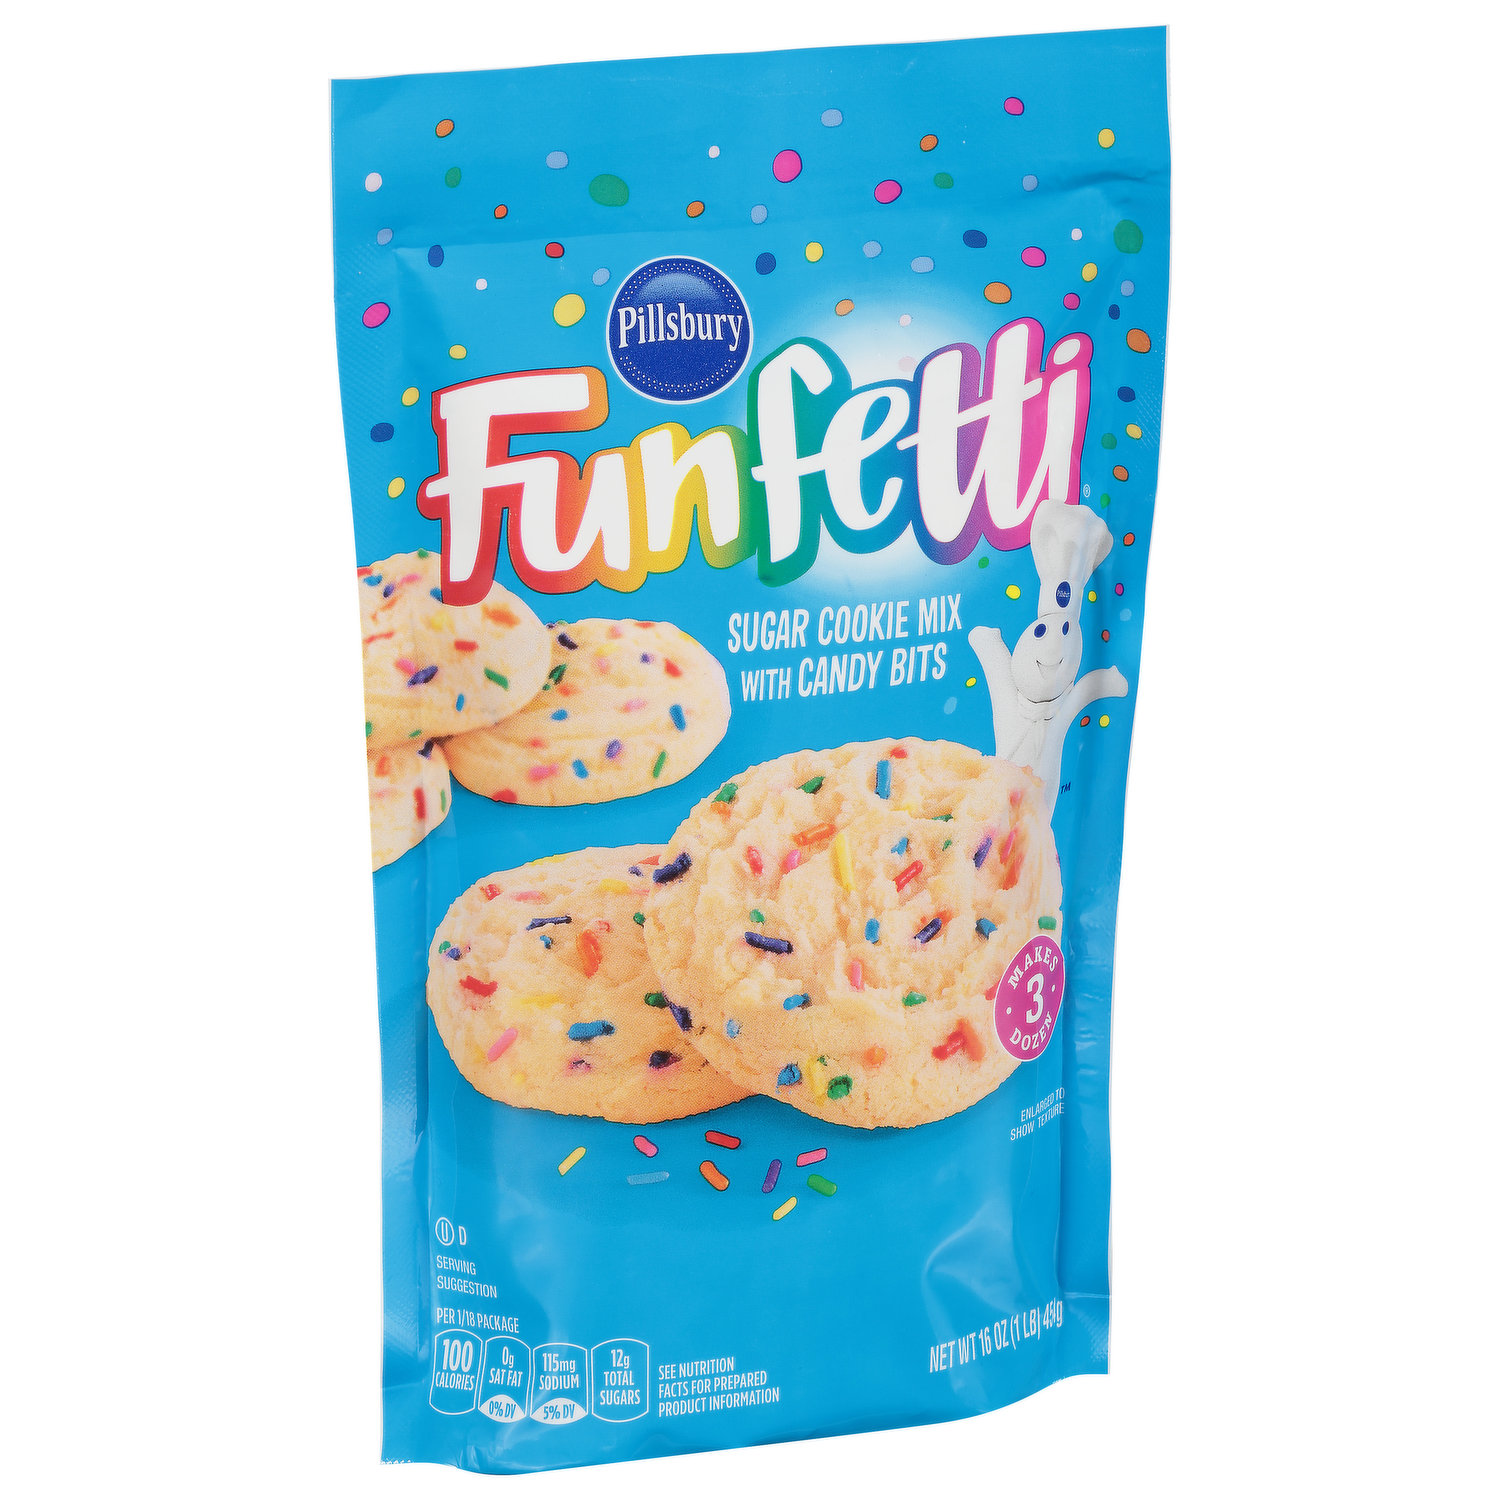 Pillsbury Sugar Cookie Mix with Candy Bits - Super 1 Foods